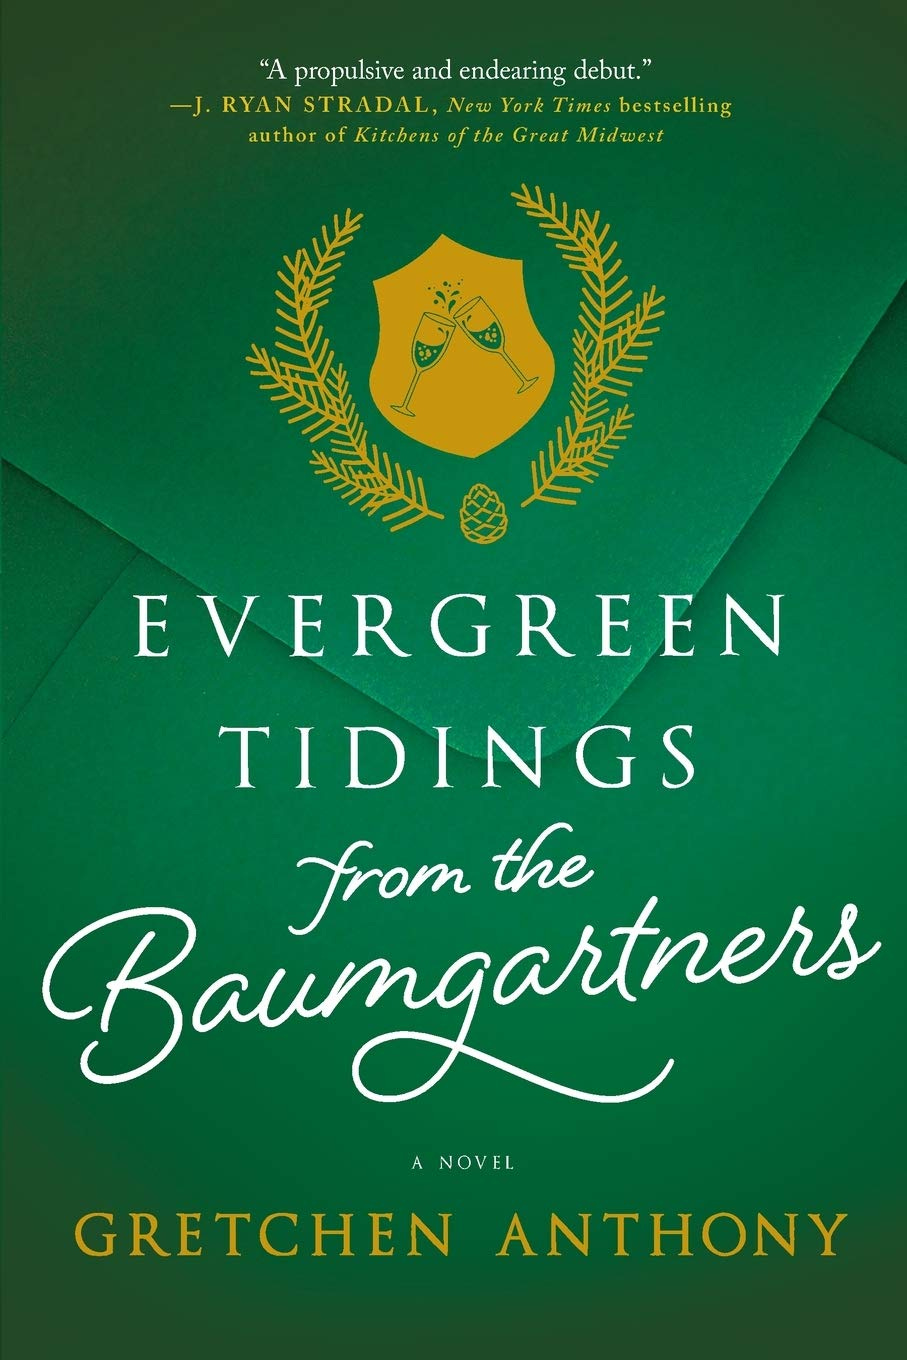 Evergreen Tidings from the Baumgartners: Anthony, Gretchen: 9780778307860:  Amazon.com: Books